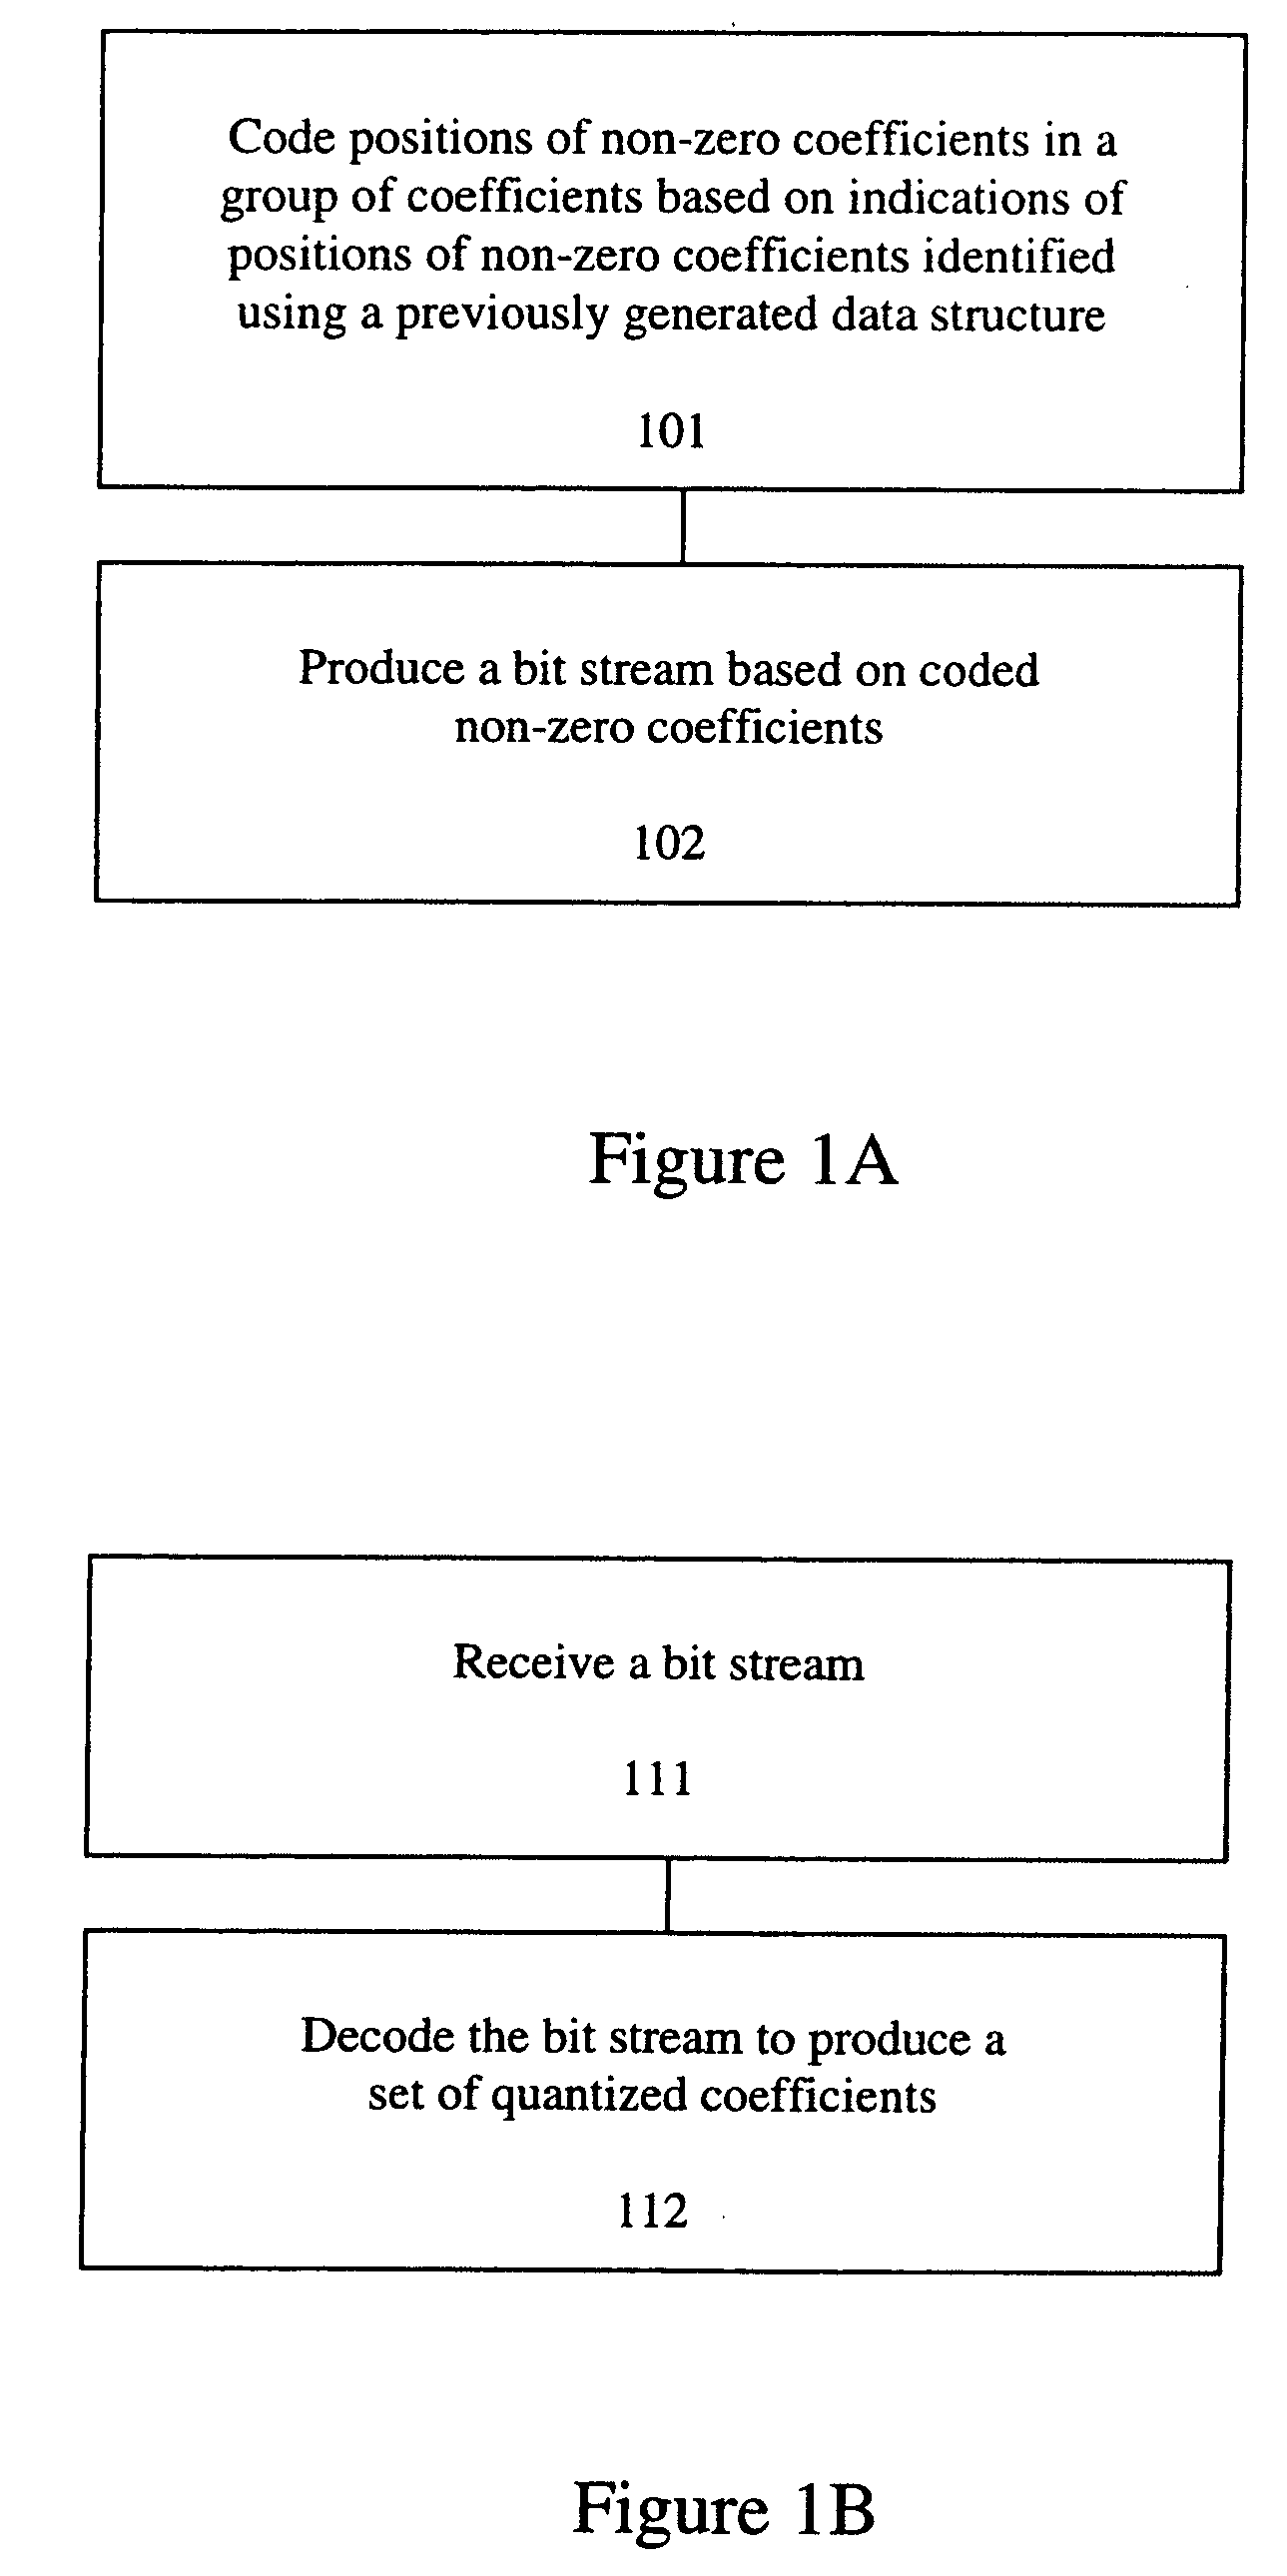 Method and apparatus for coding positions of coefficients